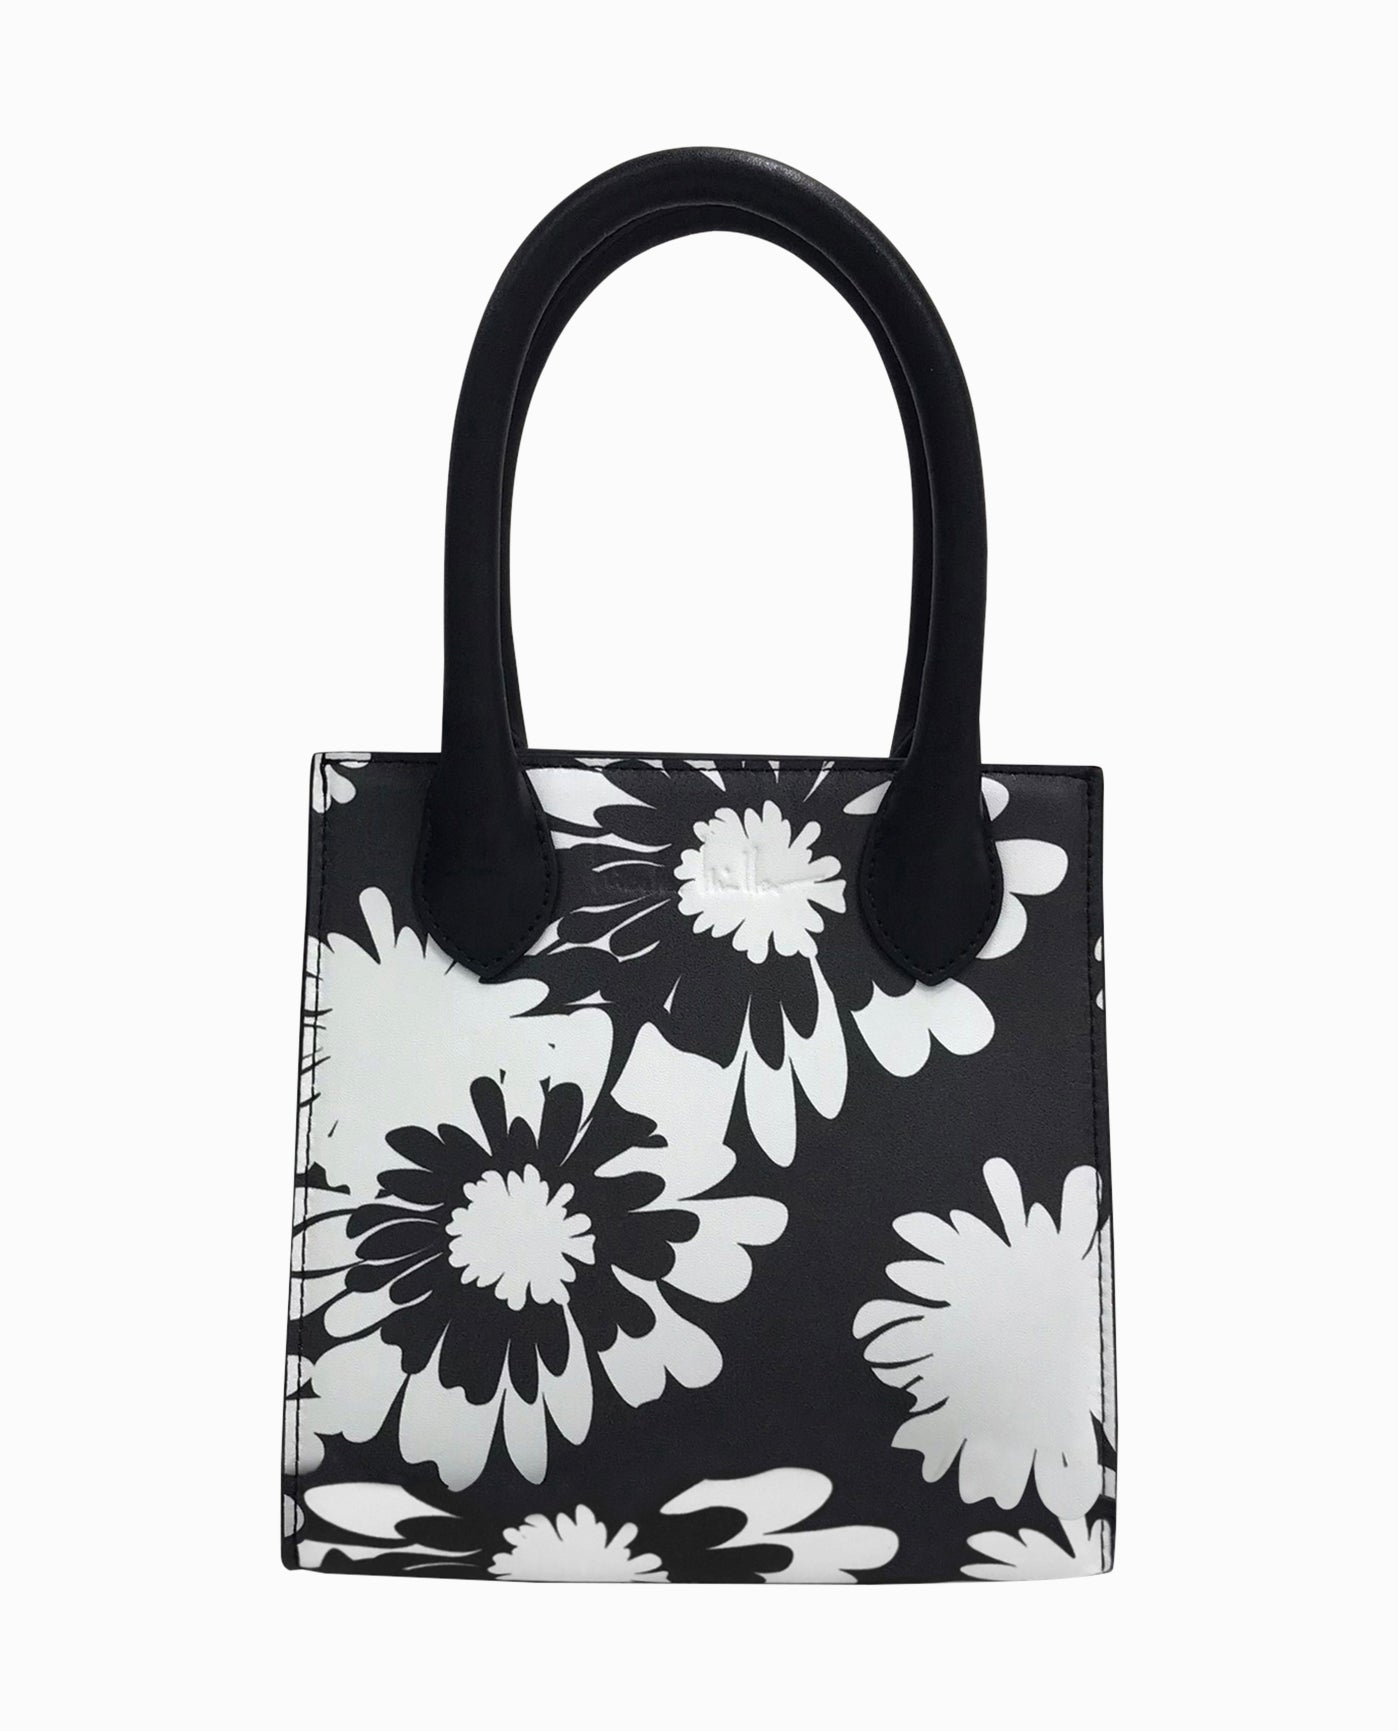 FRONT OF LEATHER NIKKI BAG | Black and White Floral